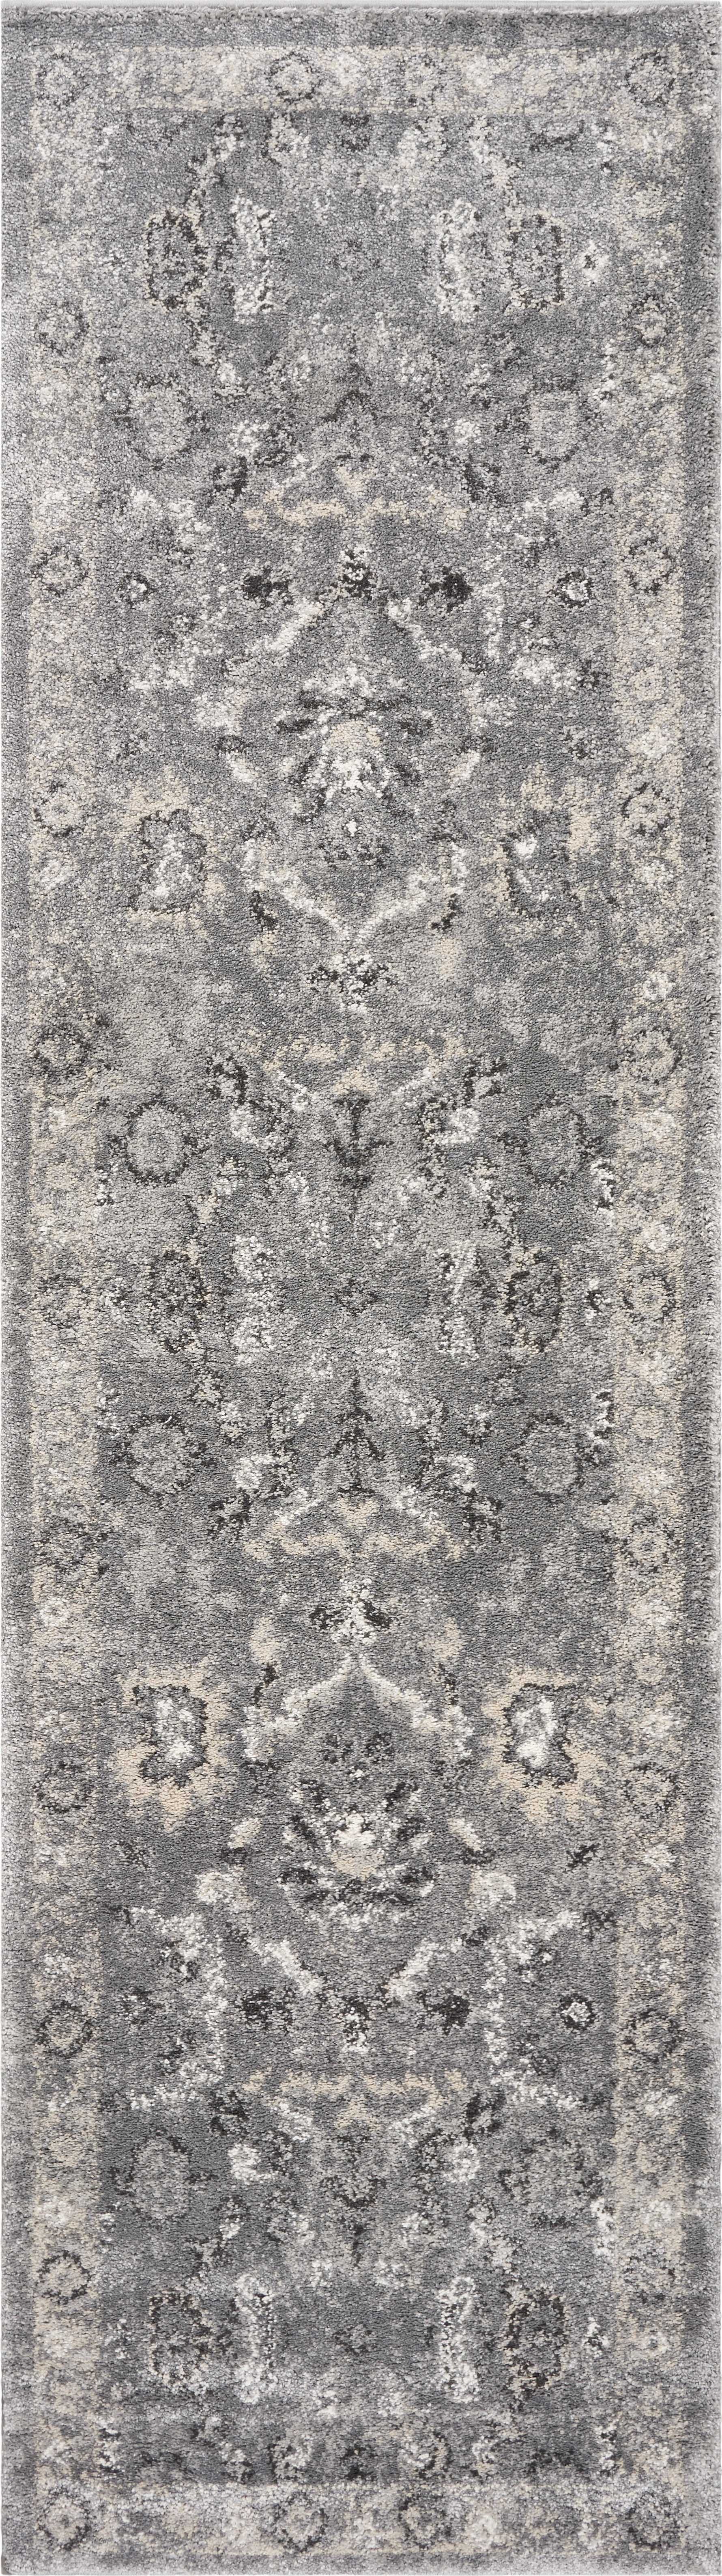 7' Grey Machine Woven Distressed Floral Traditional Indoor Runner Rug-353870-1